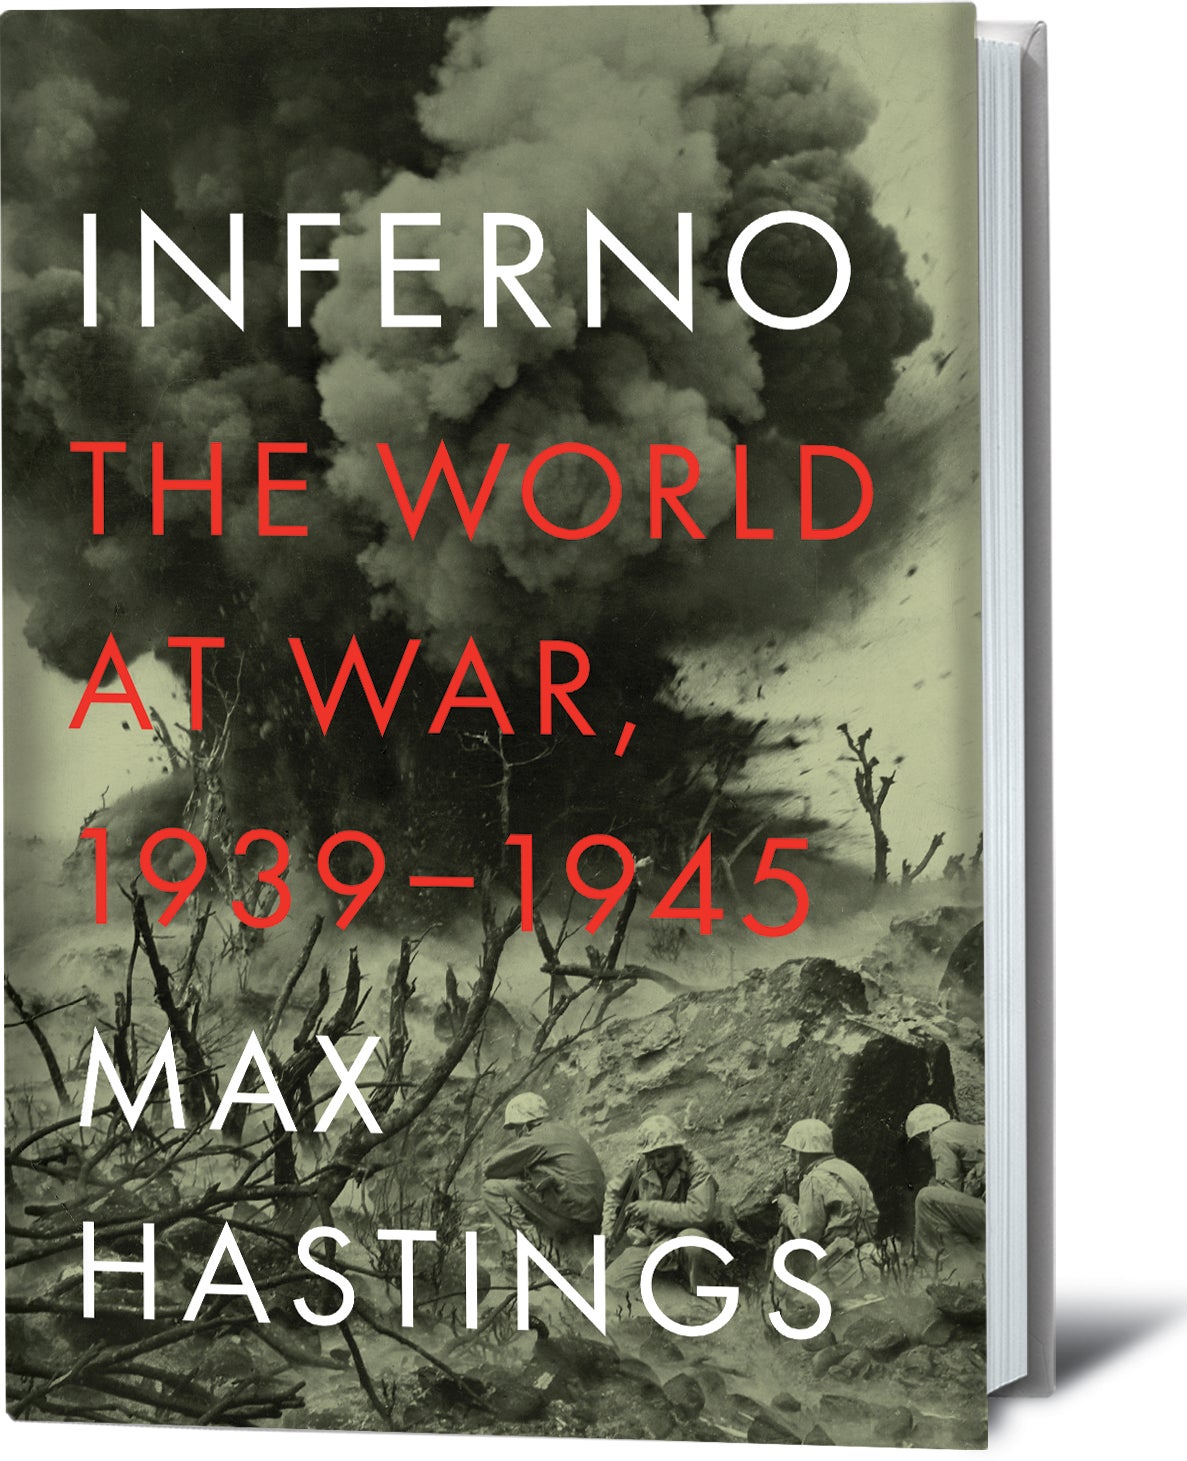 INFERNO by Max Hastings